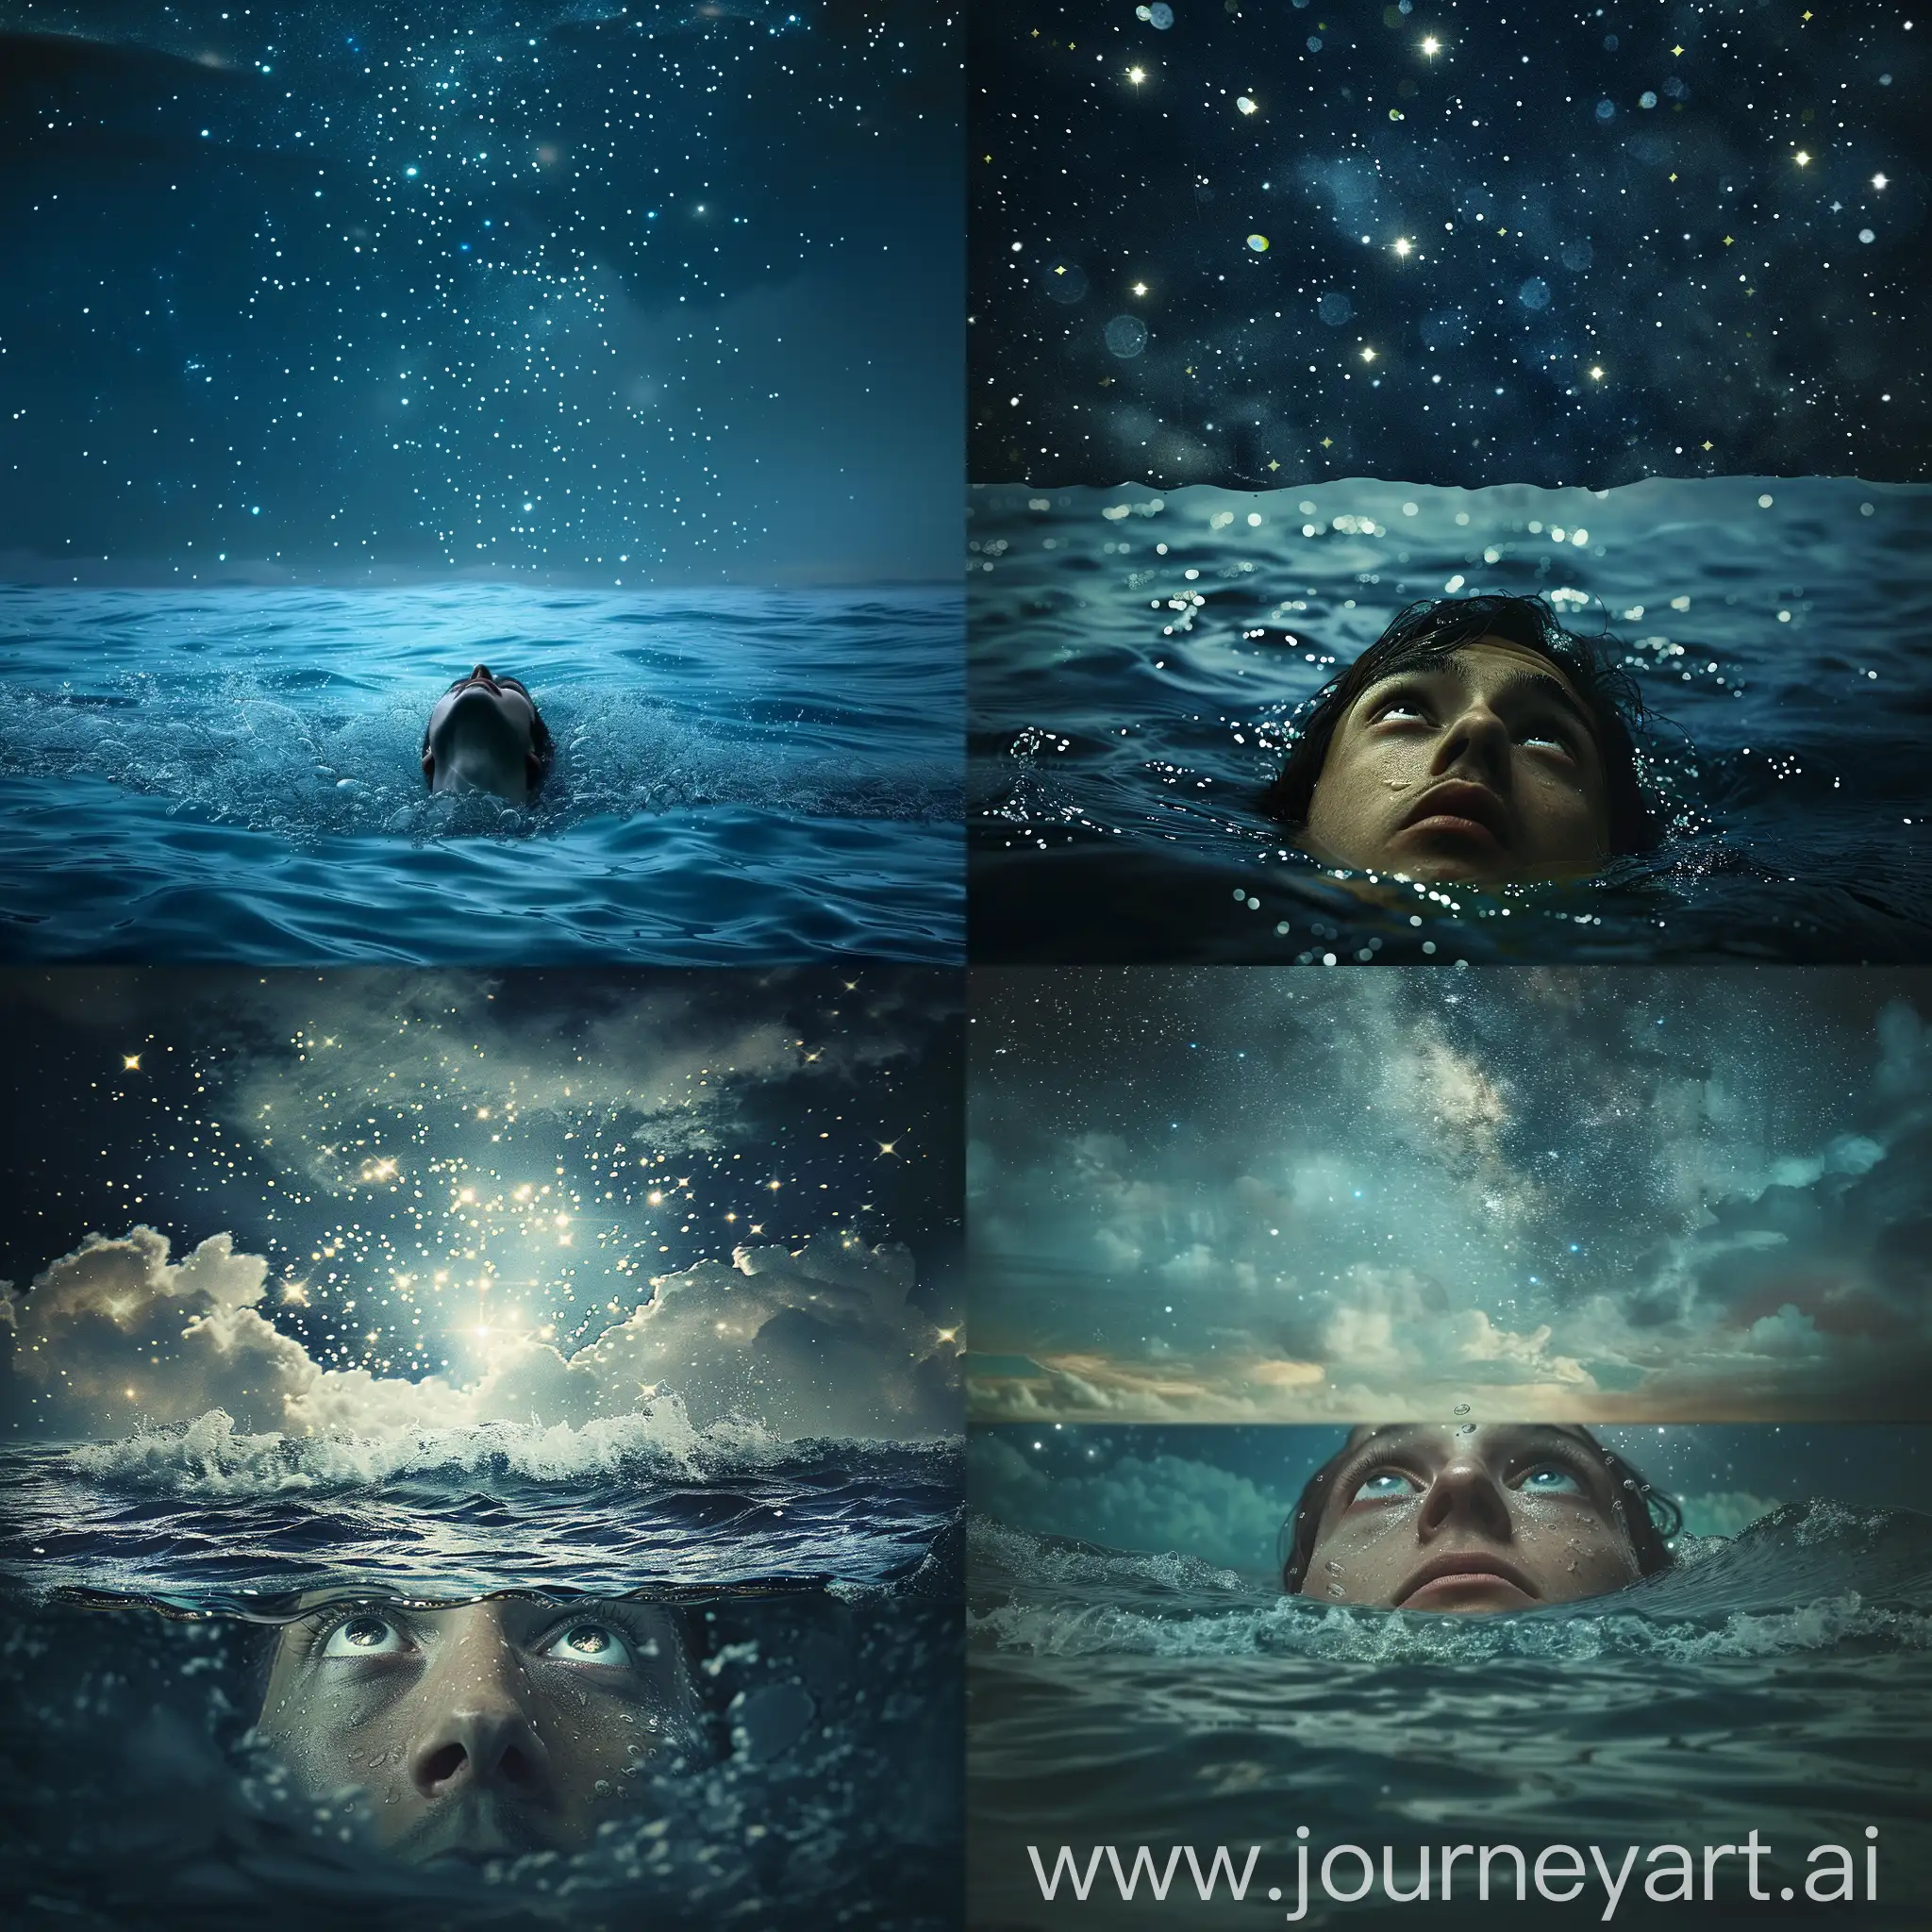 Person falling in ocean half inside water drowning and looking upwards in a bright eyes at sky full of beautiful stars